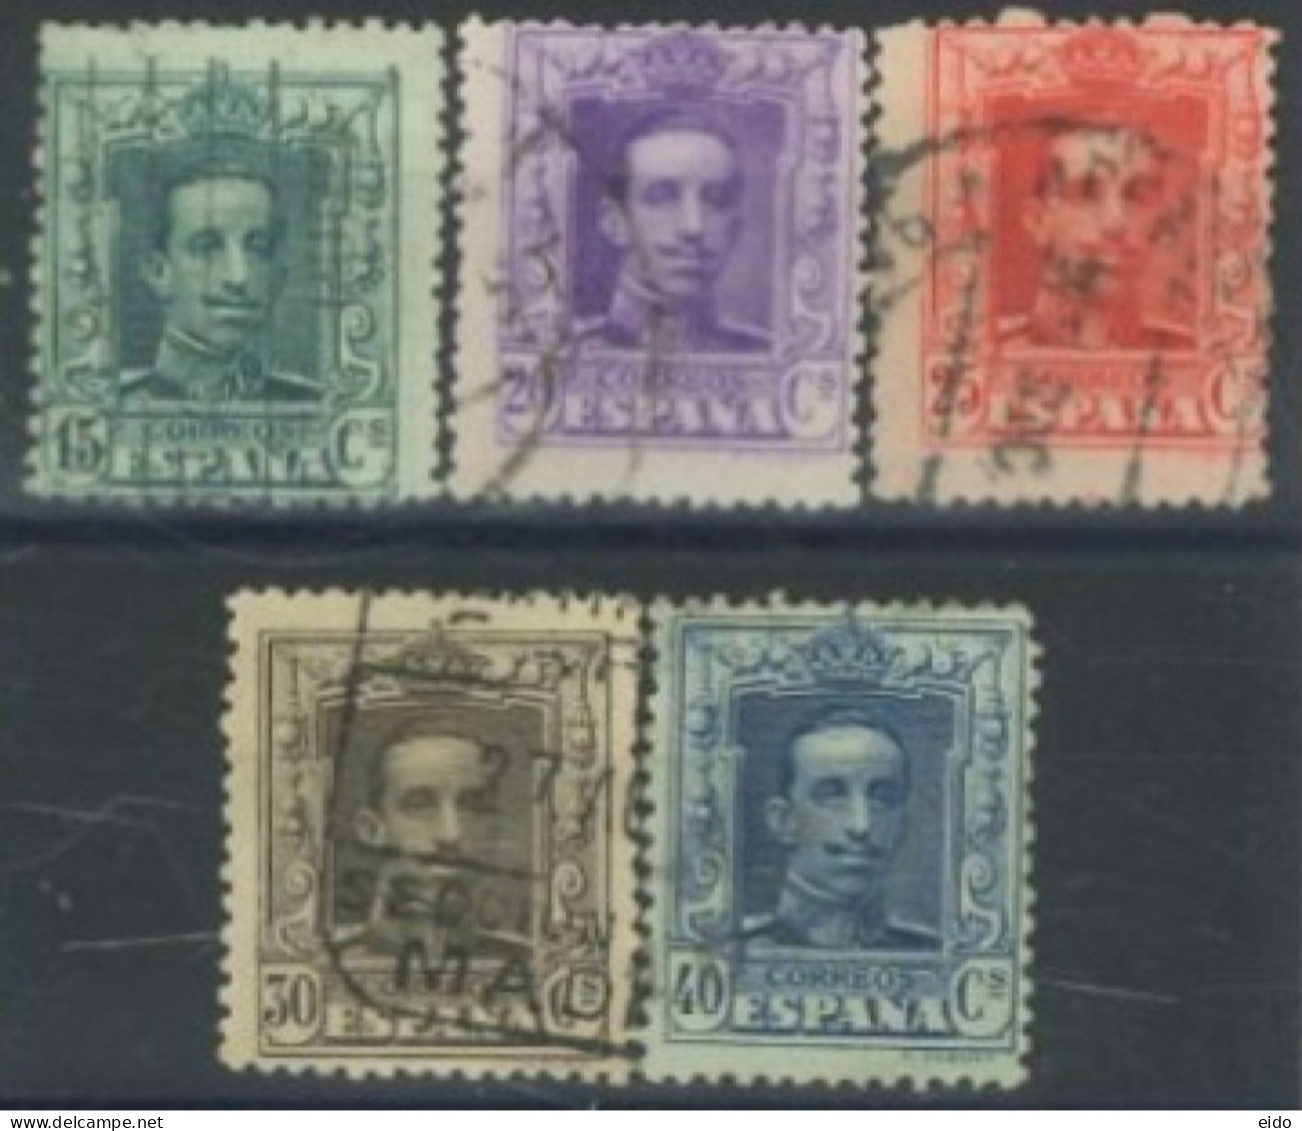 SPAIN, 1922/26, KING ALFONSO XIII STAMPS SET OF 5 # 336/40, USED. - Gebraucht